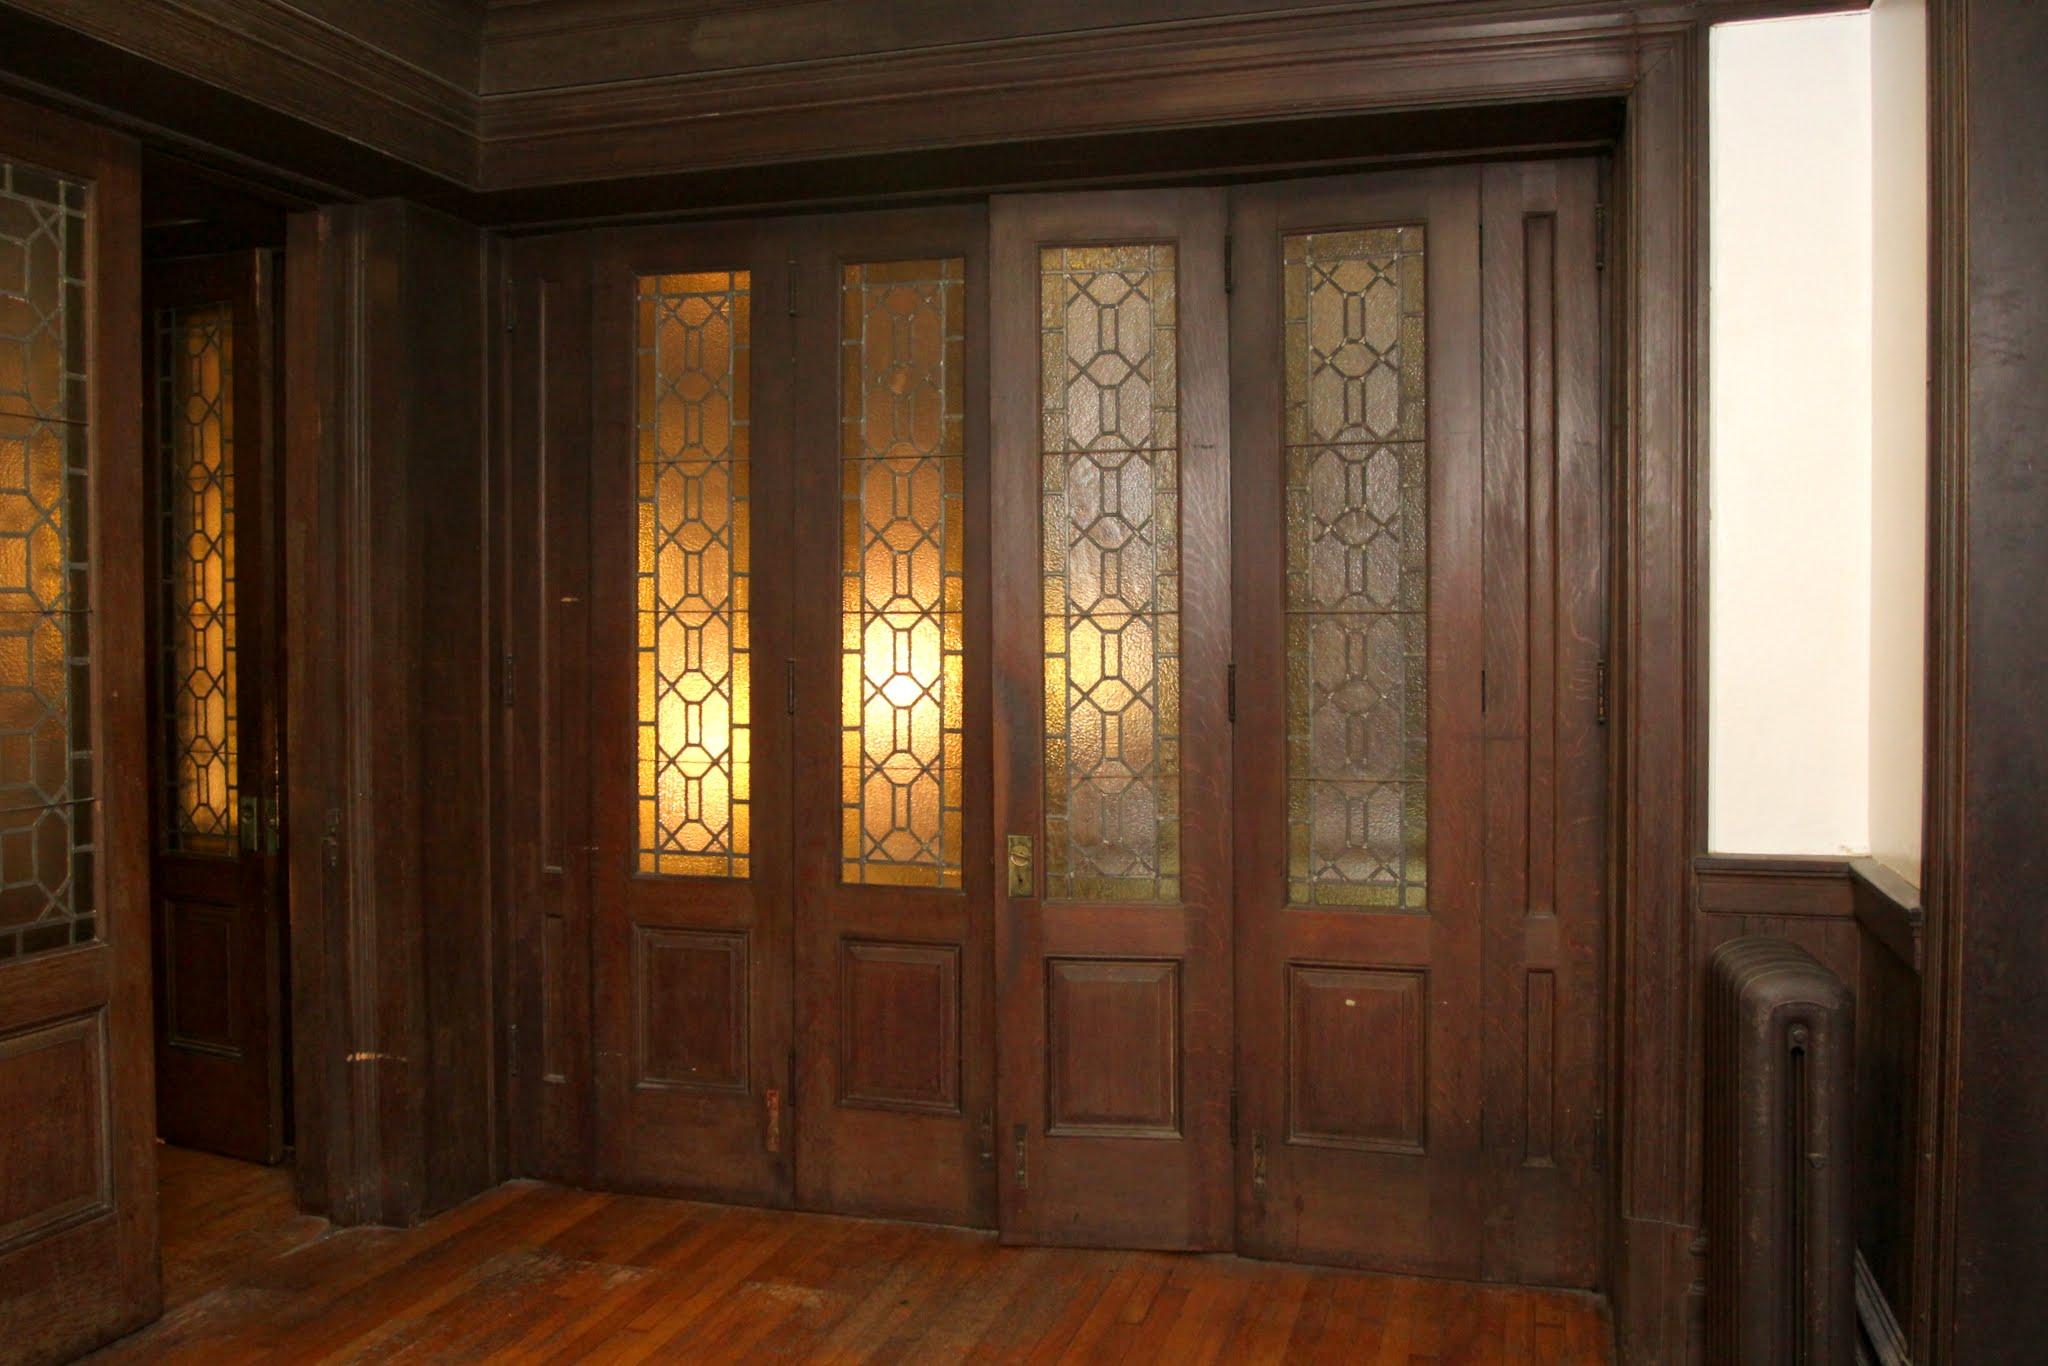 1907 Bifold Stained Glass Doors from Madison Avenue Baptist Church Parish House 6